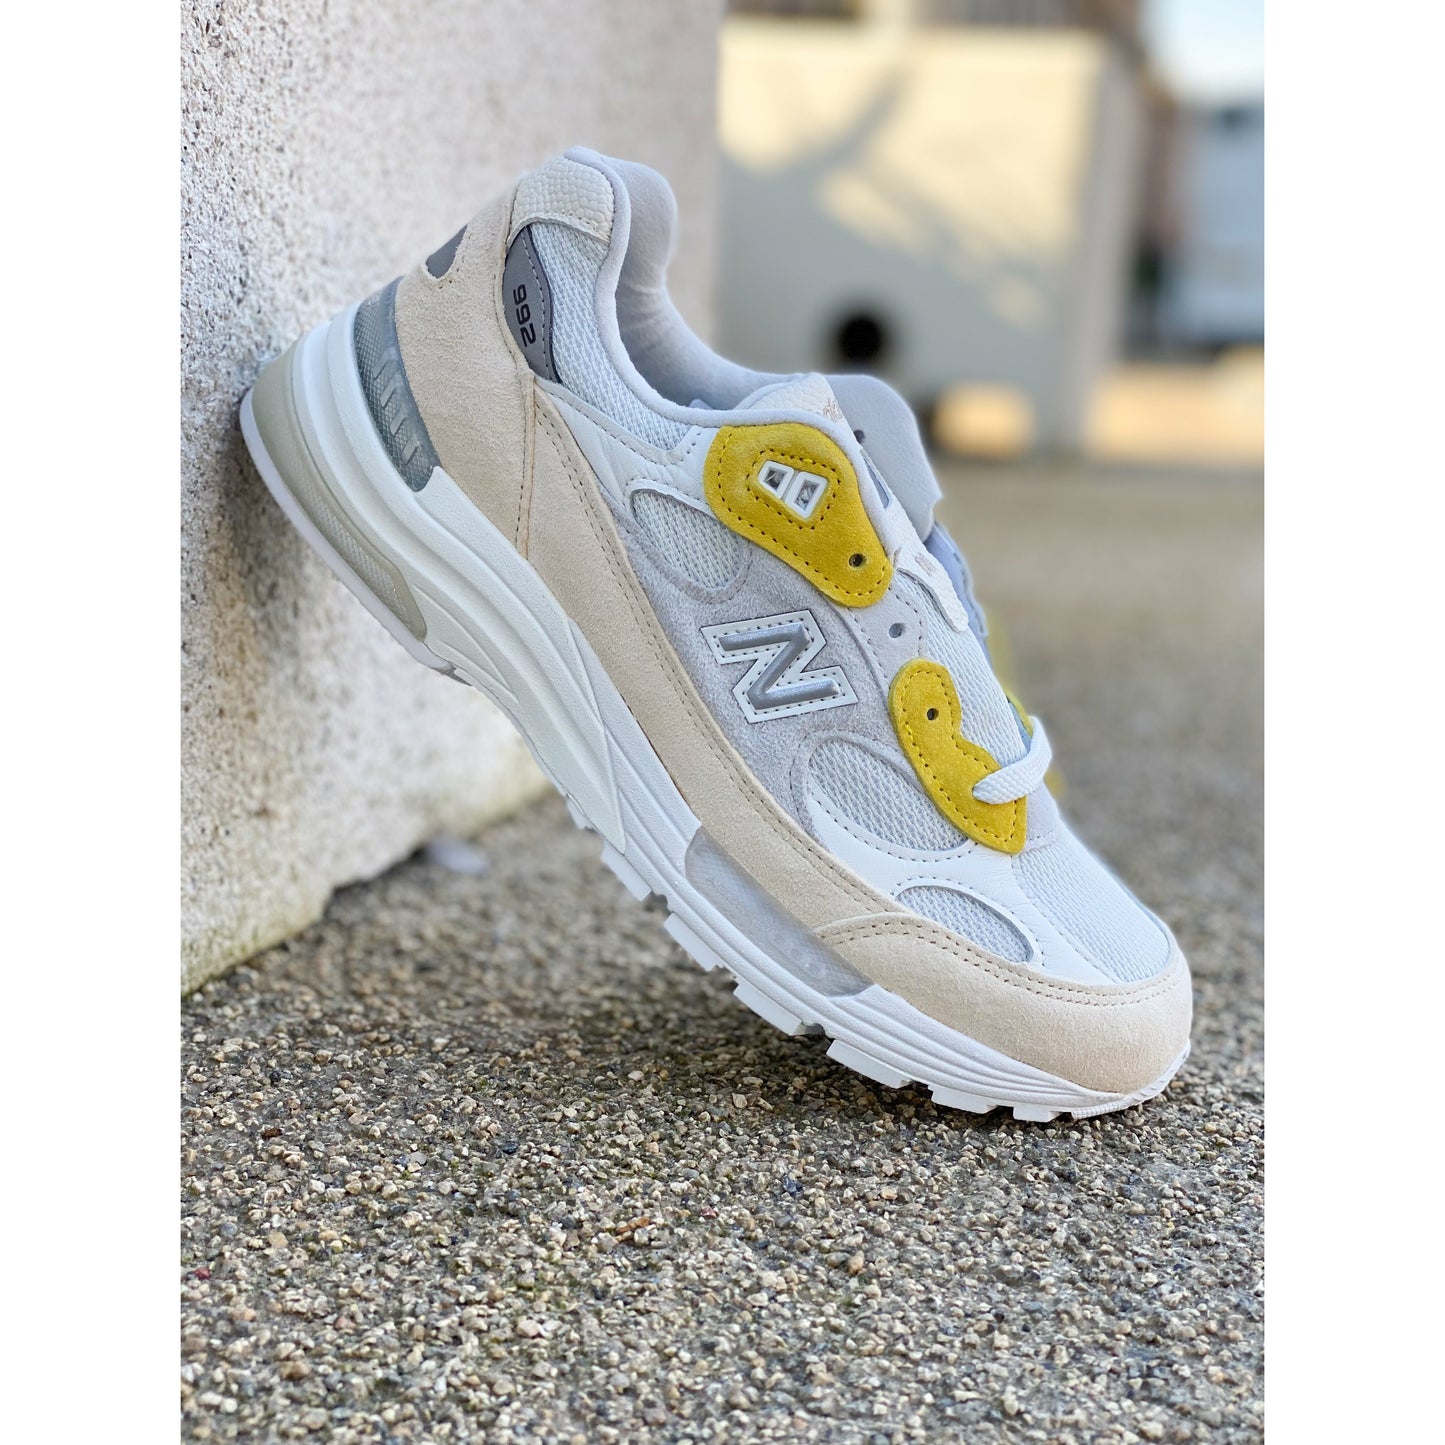 New Balance 992 Paperboy Fried Egg from New Balance